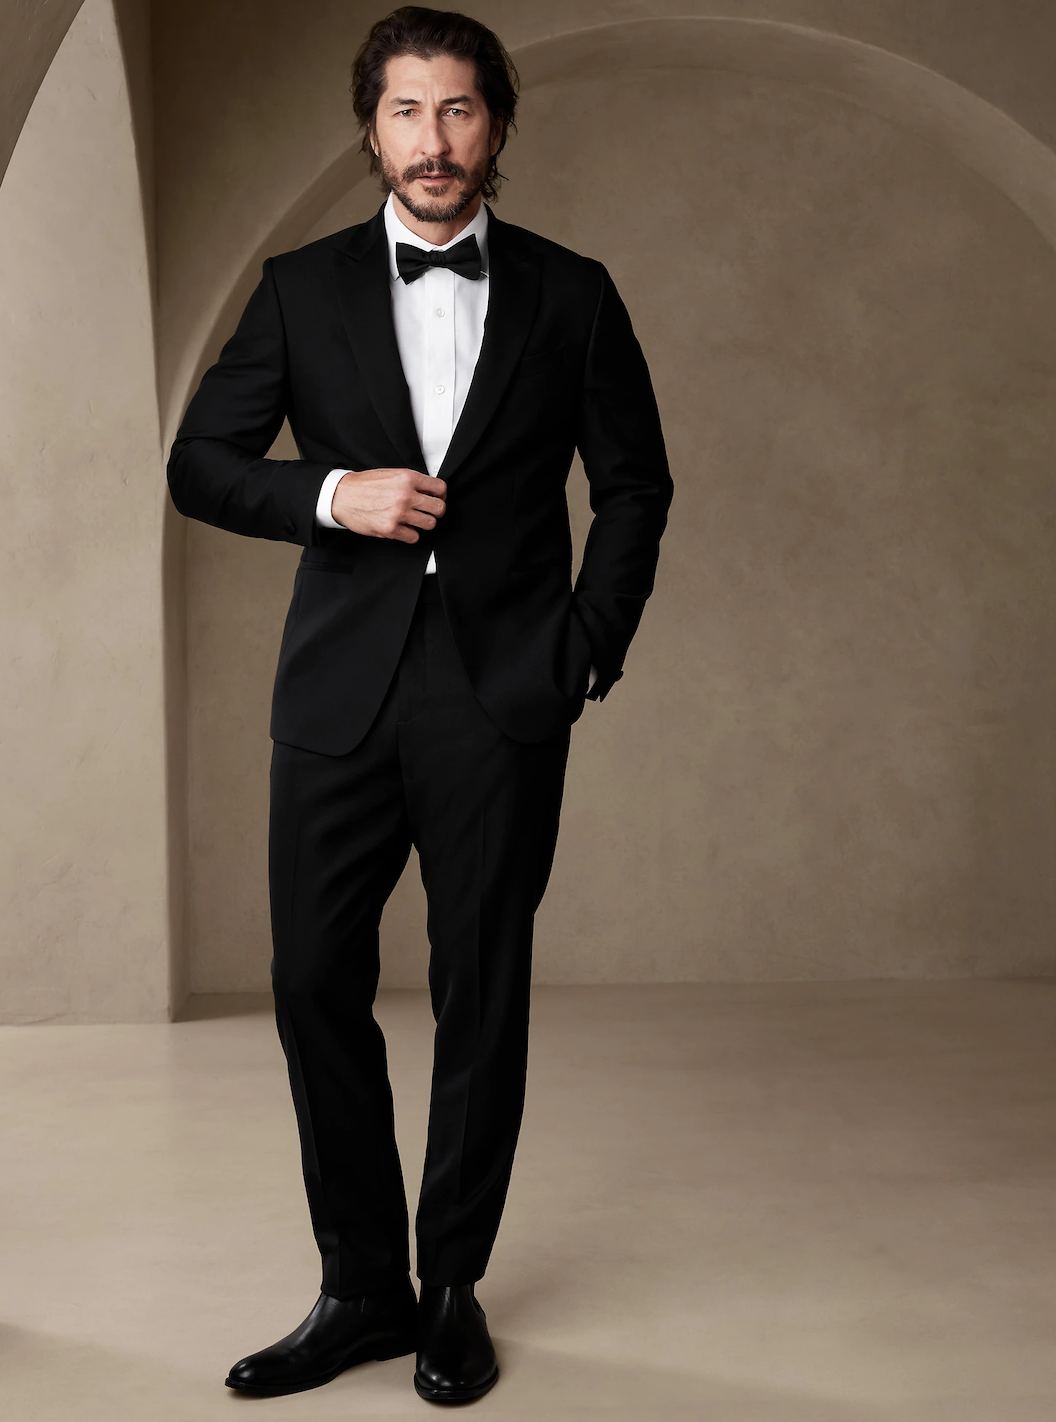 Suit Up in Style: A Groom's Guide to Wedding Guest Fashion for Men